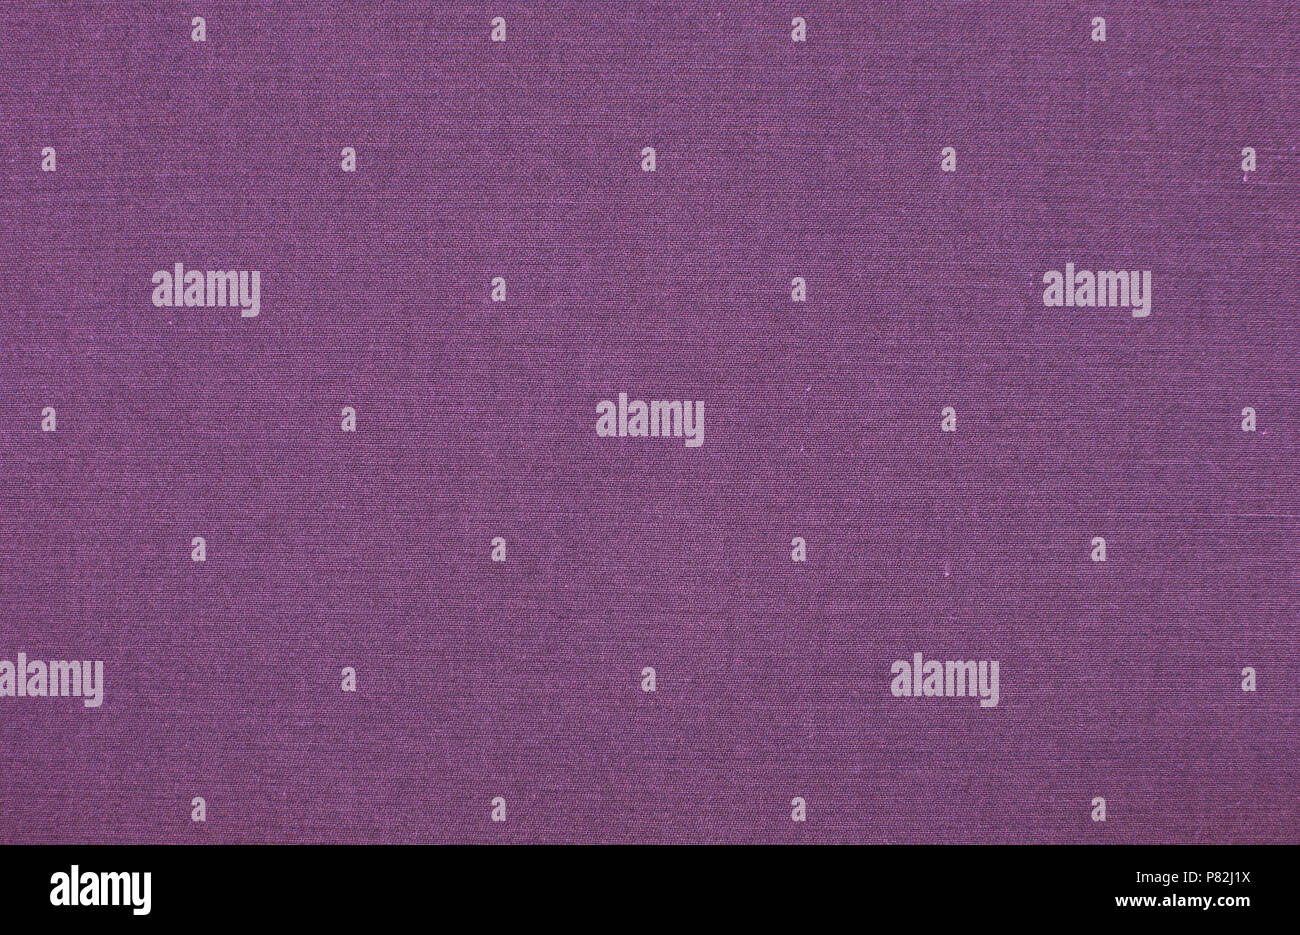 purple jeans abstract pattern texture background Stock Photo